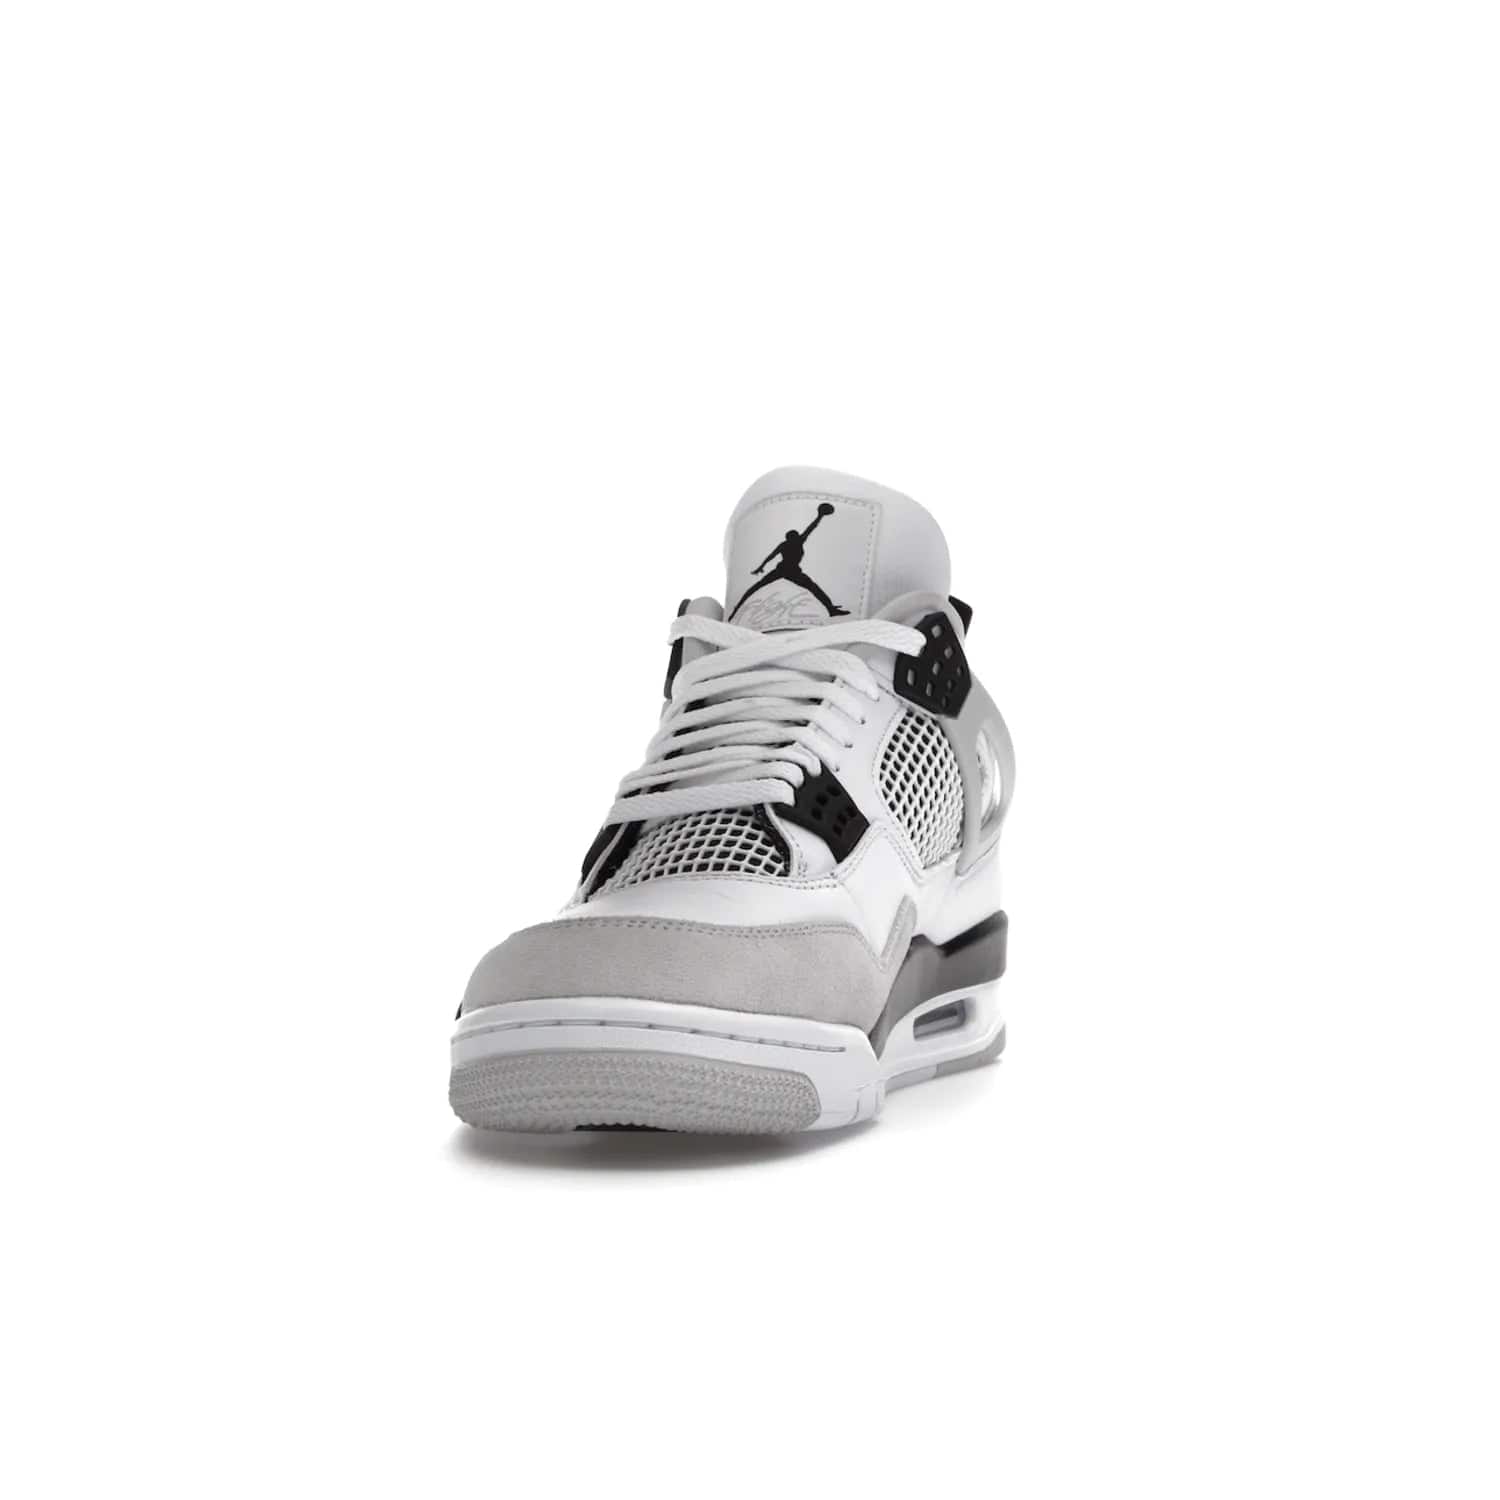 Jordan 4 Retro Military Black - Image 12 - Only at www.BallersClubKickz.com - Updated Air Jordan 4 style with a white/black/light grey sole and visible Air unit. Released in May 2022, offering timeless classic style and comfort.